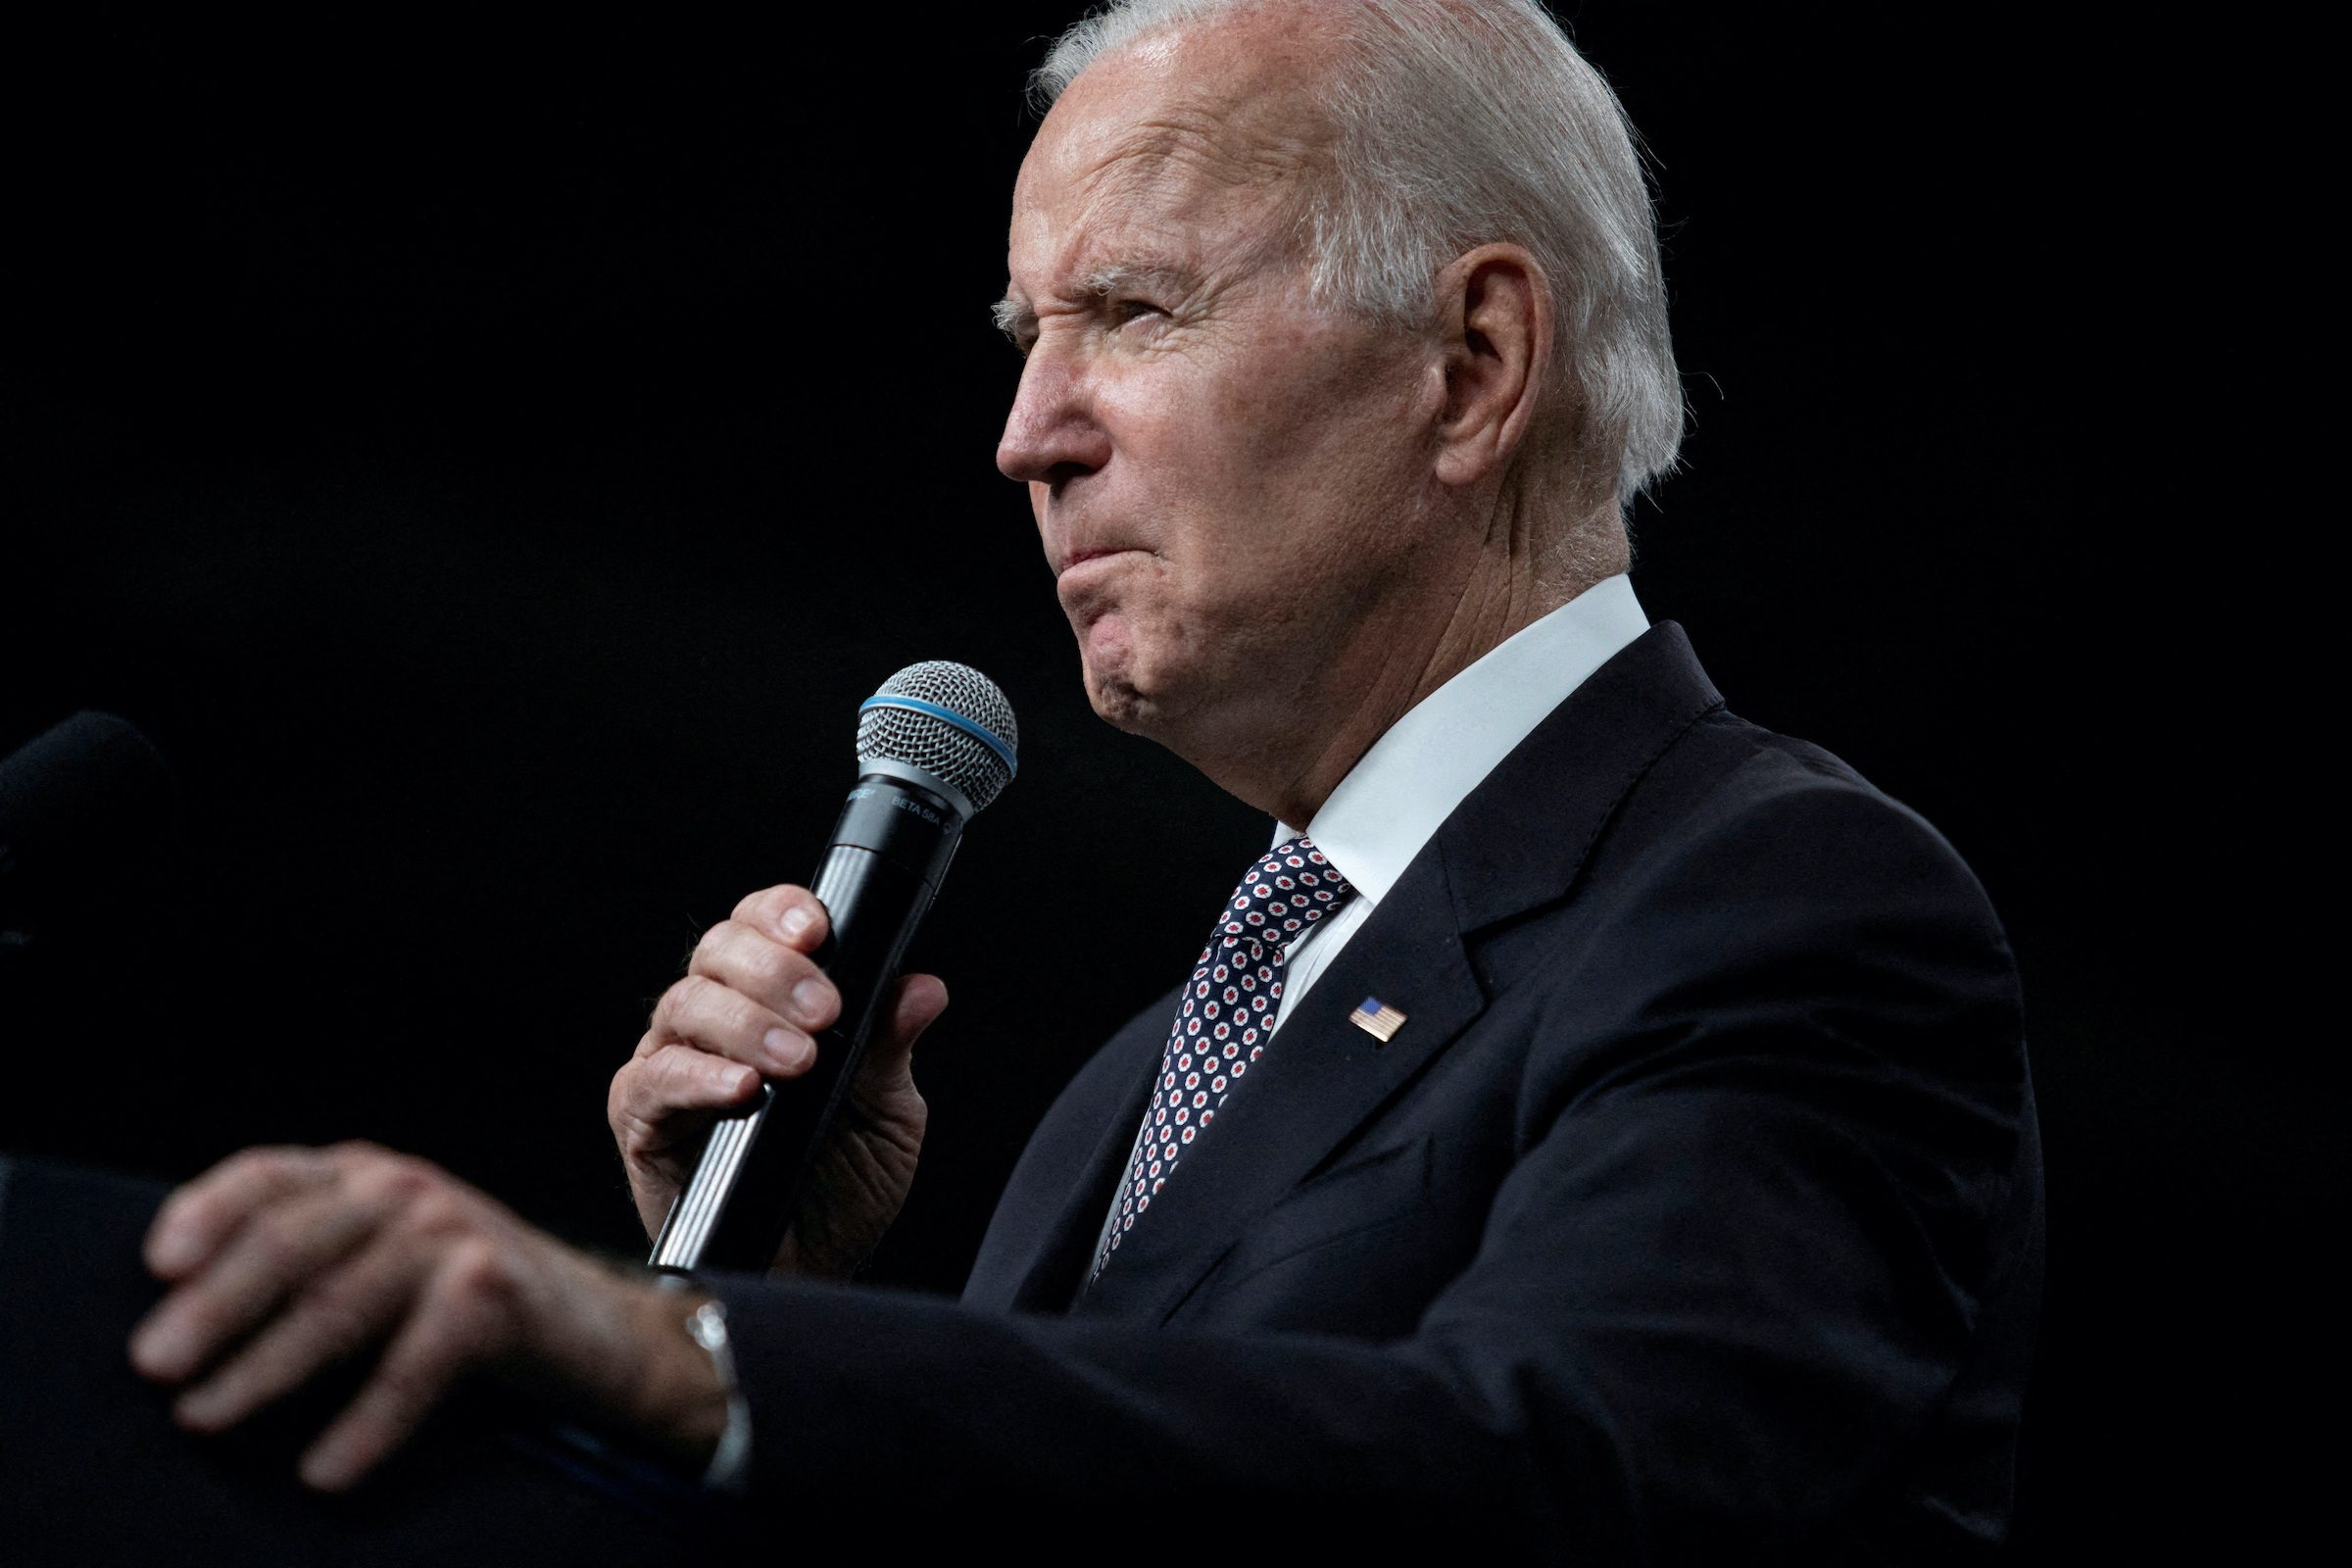 Biden says prices ‘too high’ as inflation rises before midterms